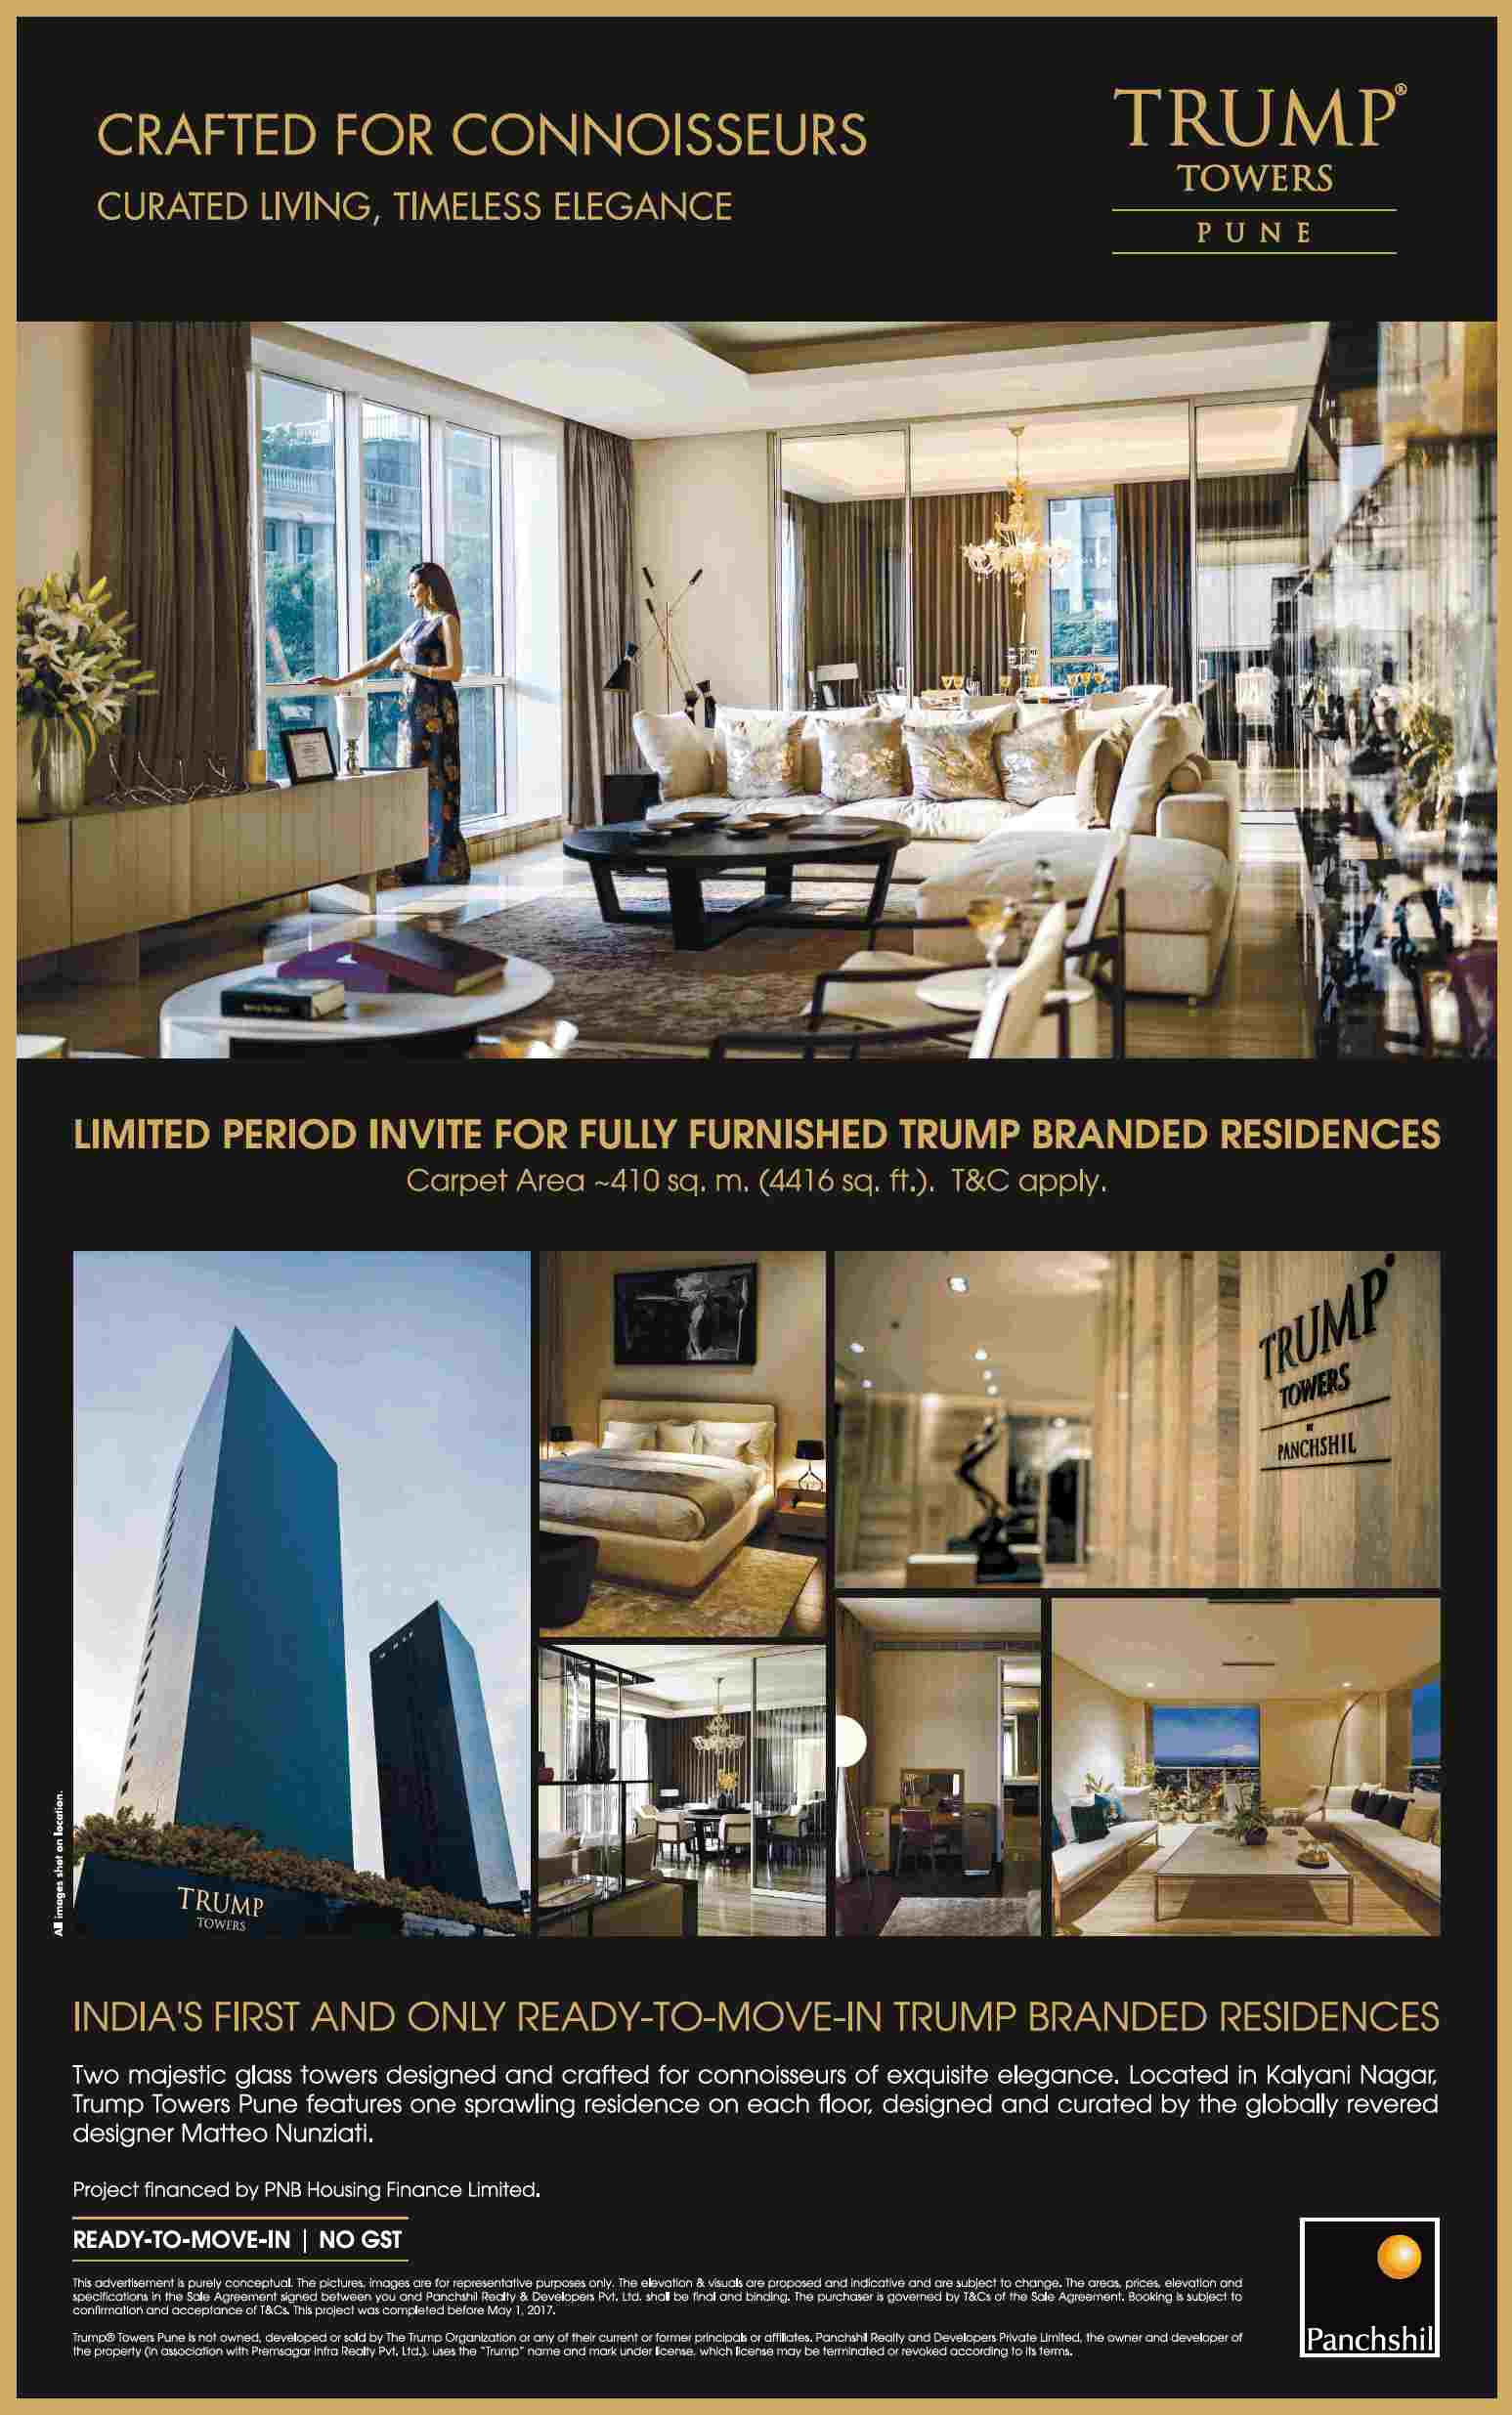 Panchshil Trump Towers is crafted for connoisseurs curated living in Kalyani Nagar, Pune Update